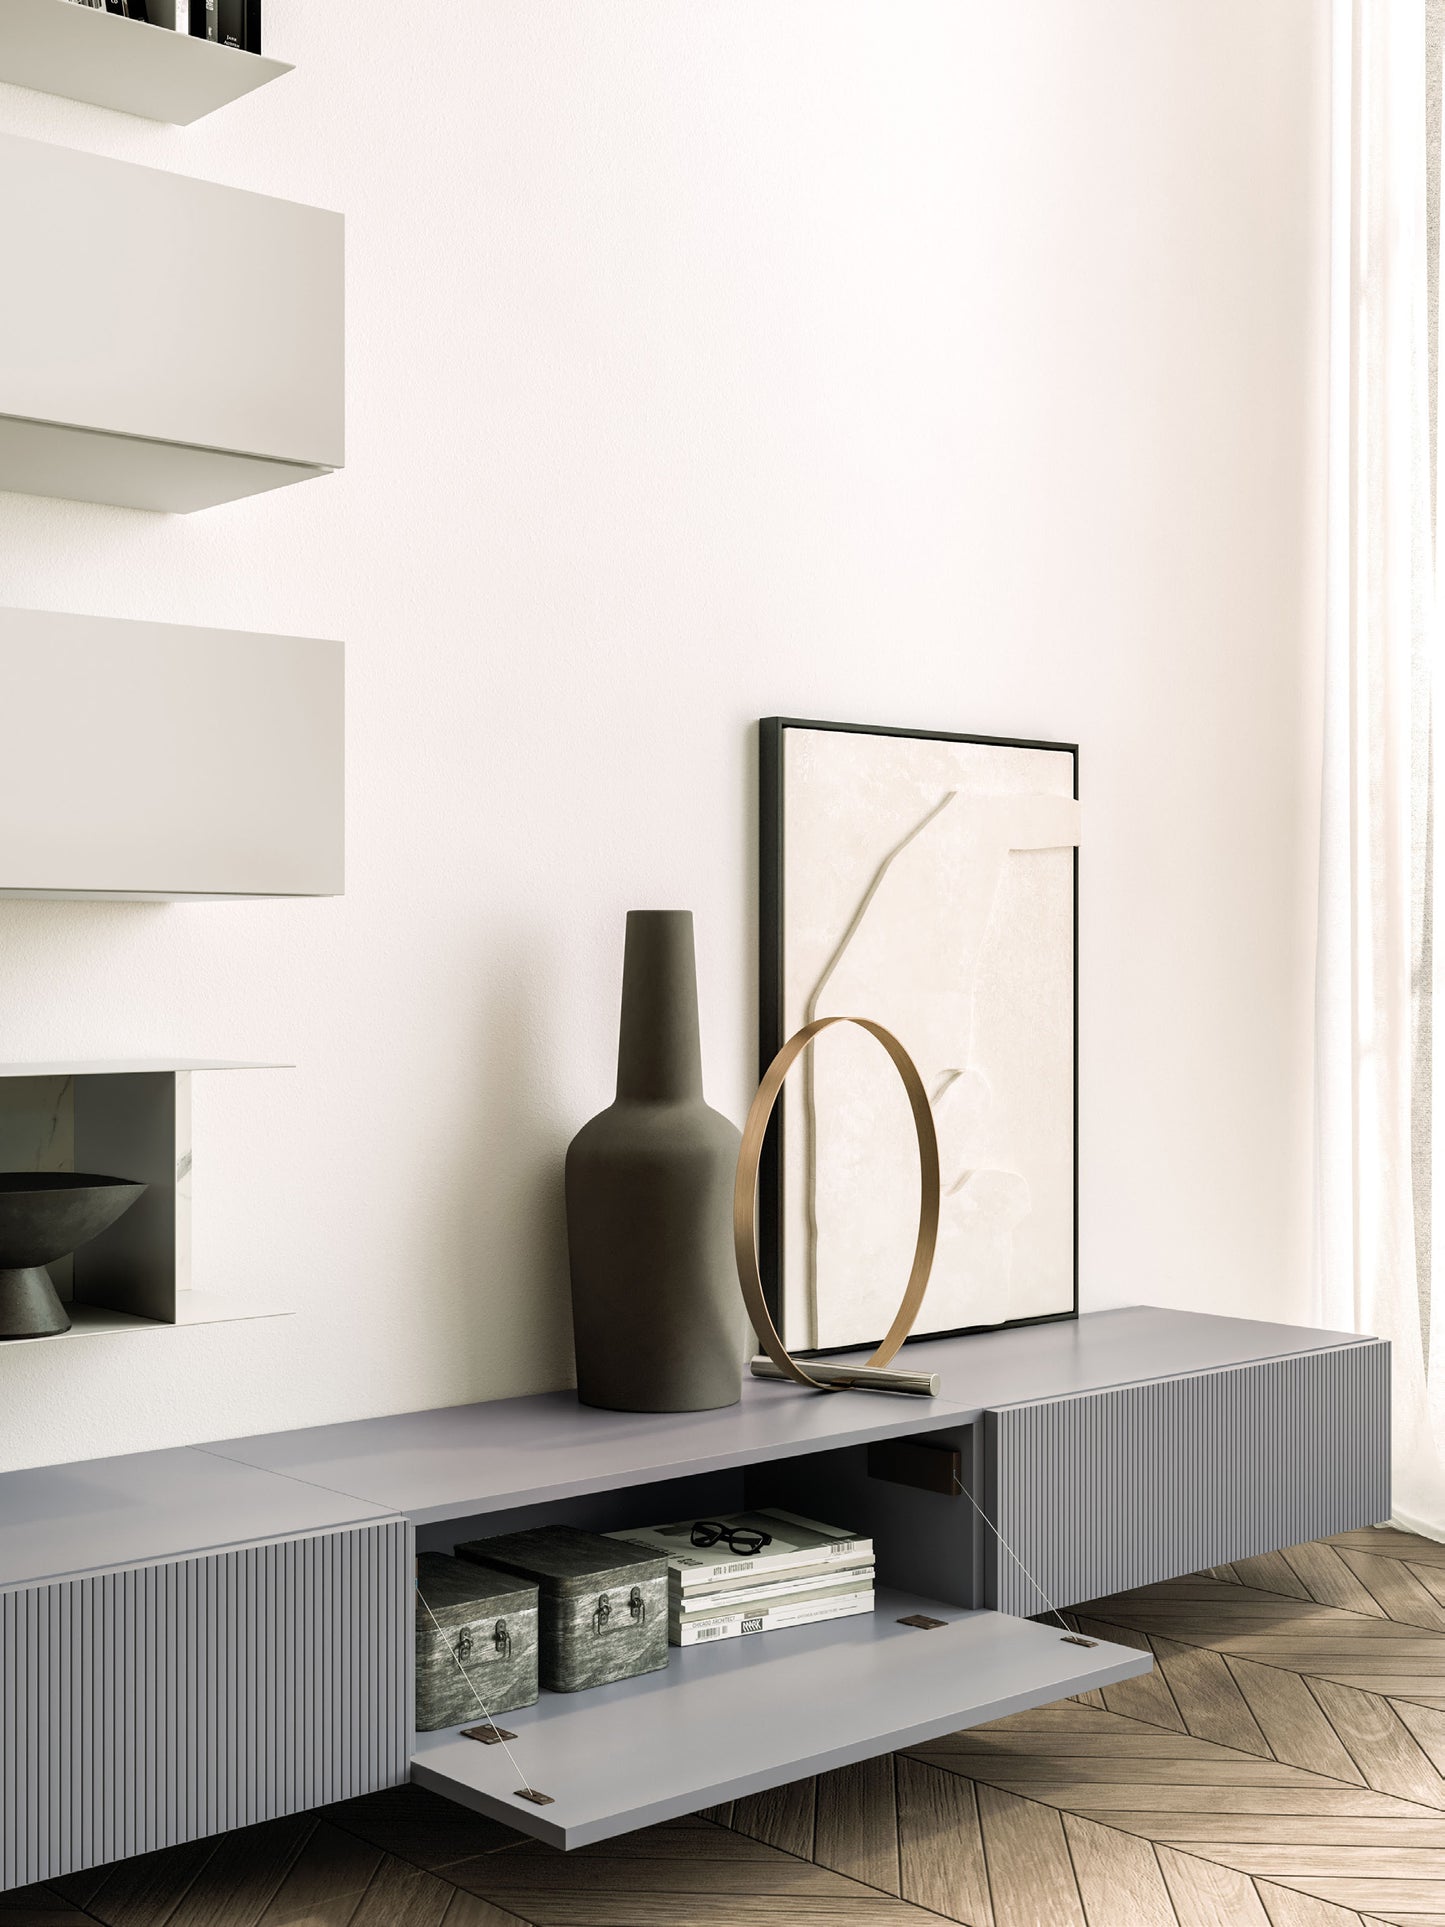 Day 04-23 Modern Wall Unit by Orme Design